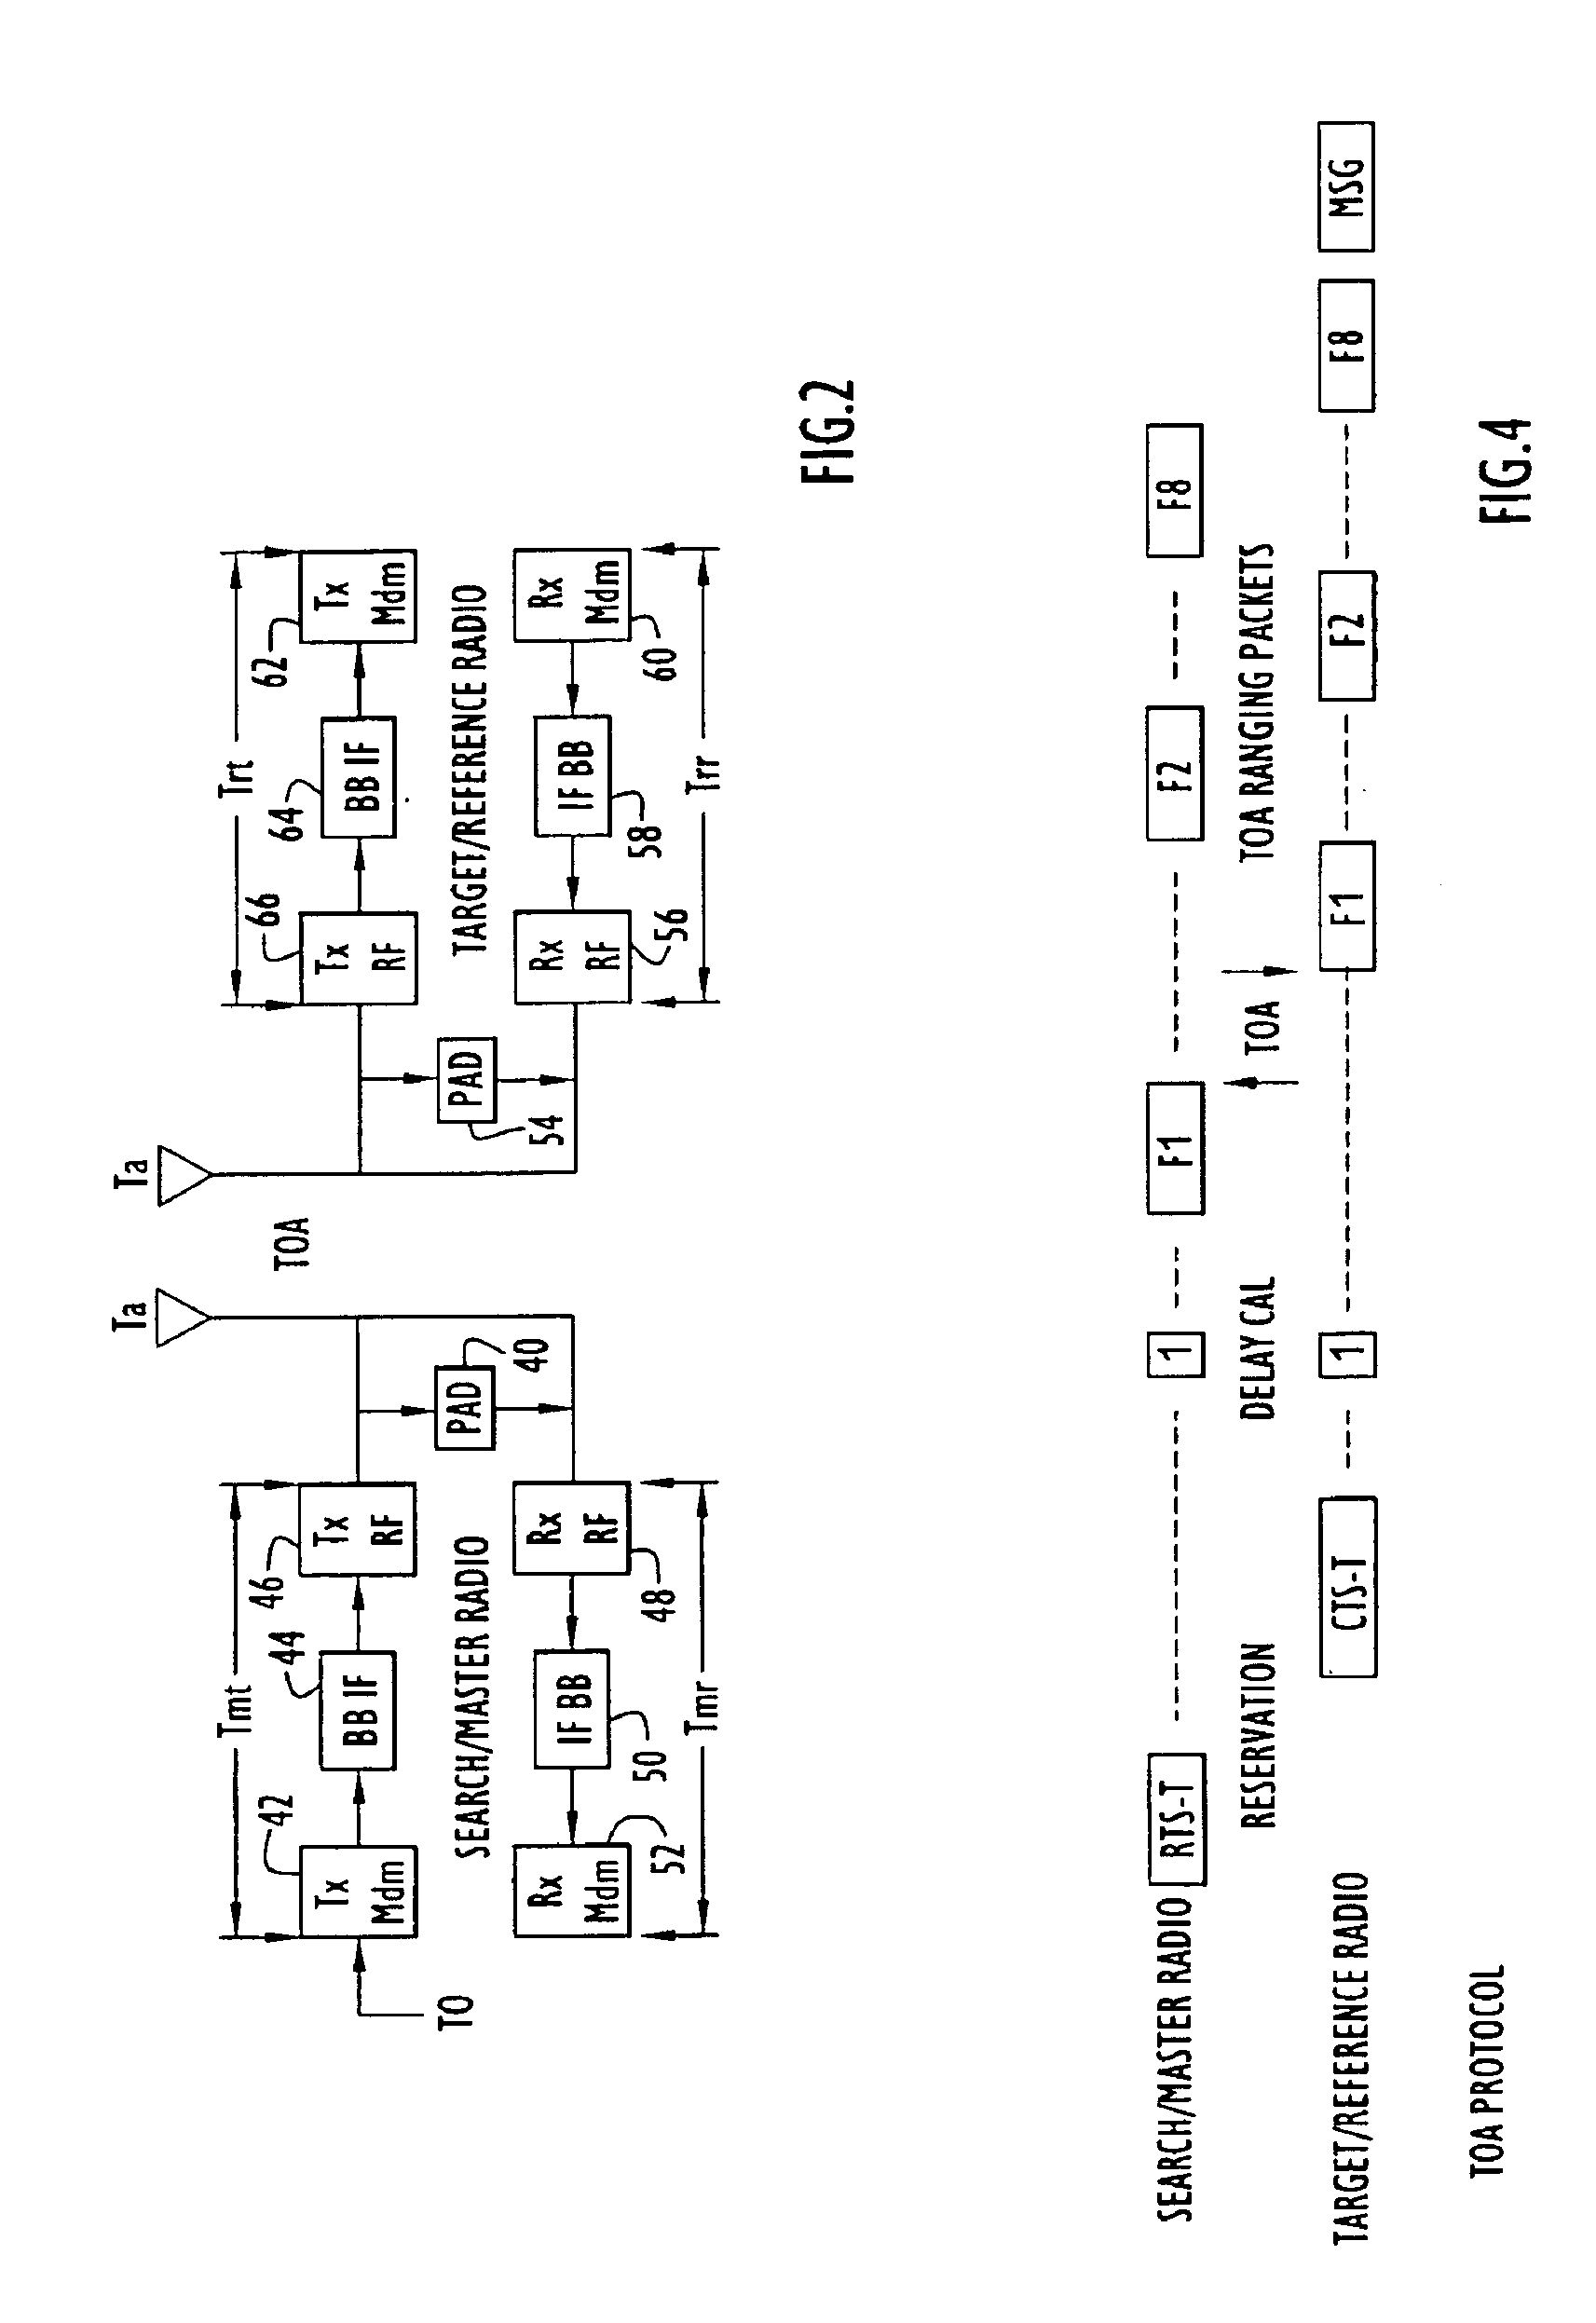 Method and apparatus for high-accuracy position location using search mode ranging techniques